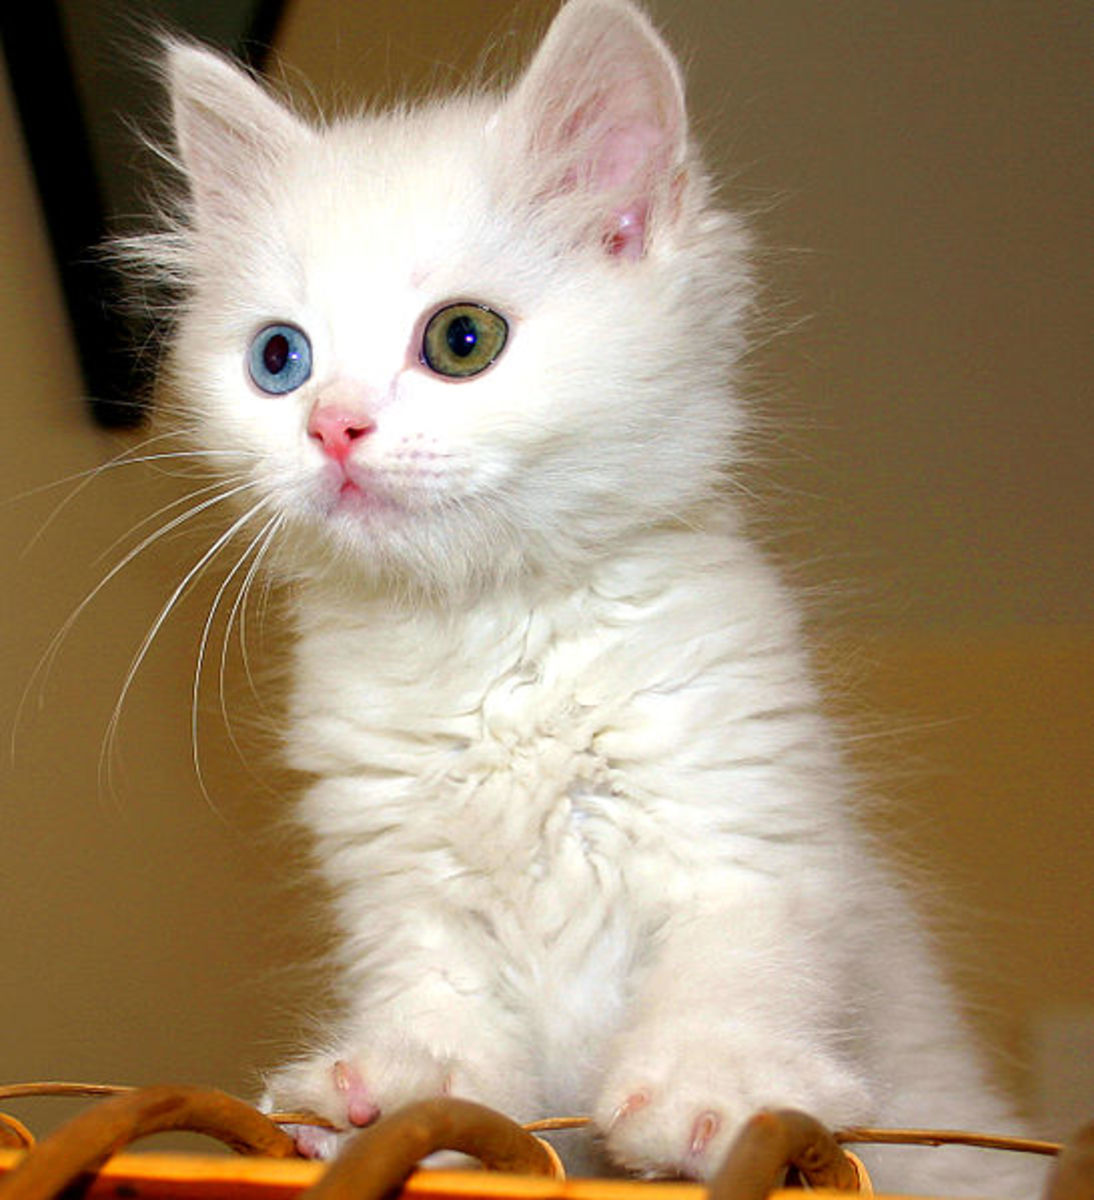 This kitten exhibits the two eye colors common to the Turkish Van.